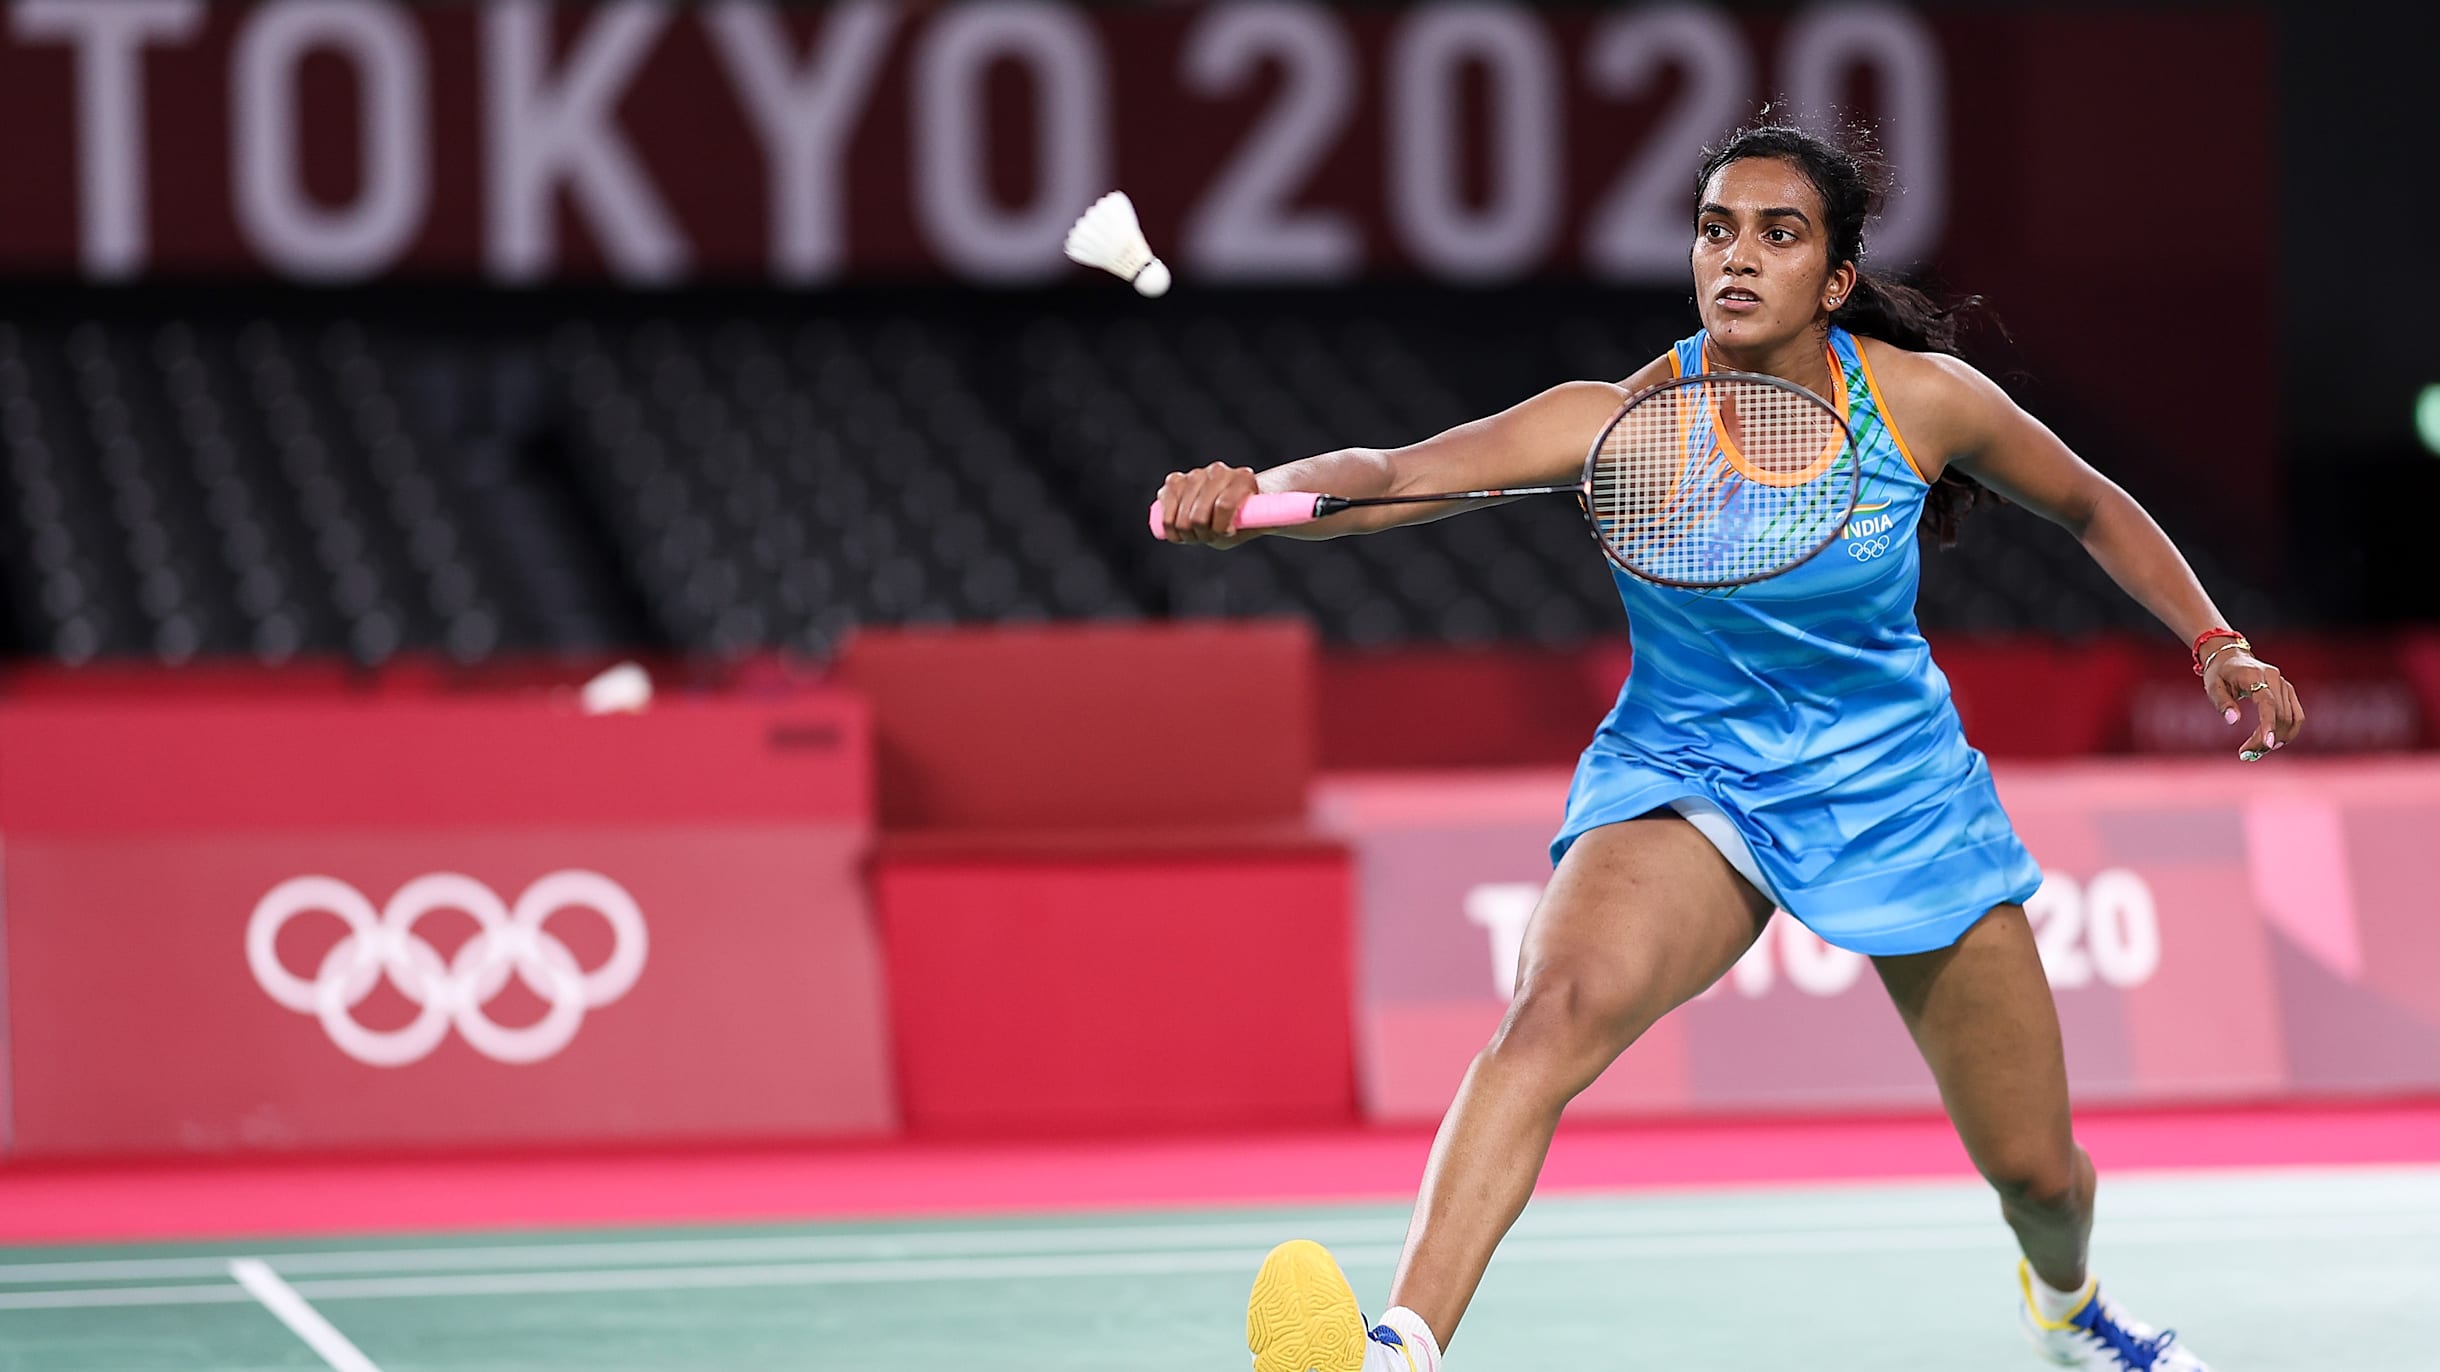 Singapore Open badminton 2022 Watch live streaming and telecast in India